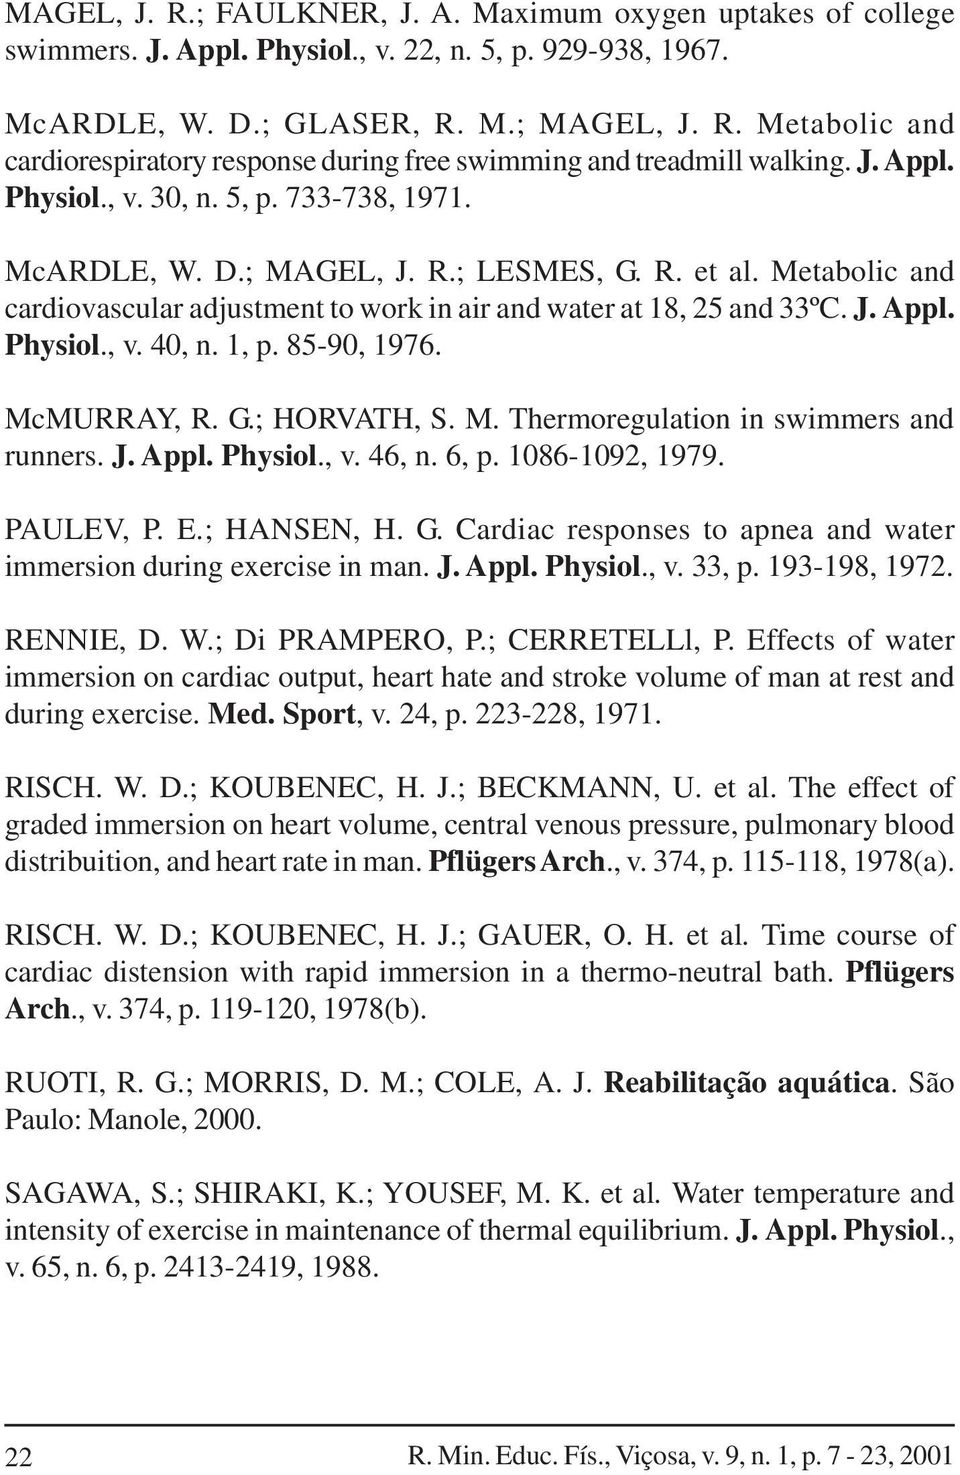 1, p. 85-90, 1976. McMURRAY, R. G.; HORVATH, S. M. Thermoregulation in swimmers and runners. J. Appl. Physiol., v. 46, n. 6, p. 1086-1092, 1979. PAULEV, P. E.; HANSEN, H. G. Cardiac responses to apnea and water immersion during exercise in man.